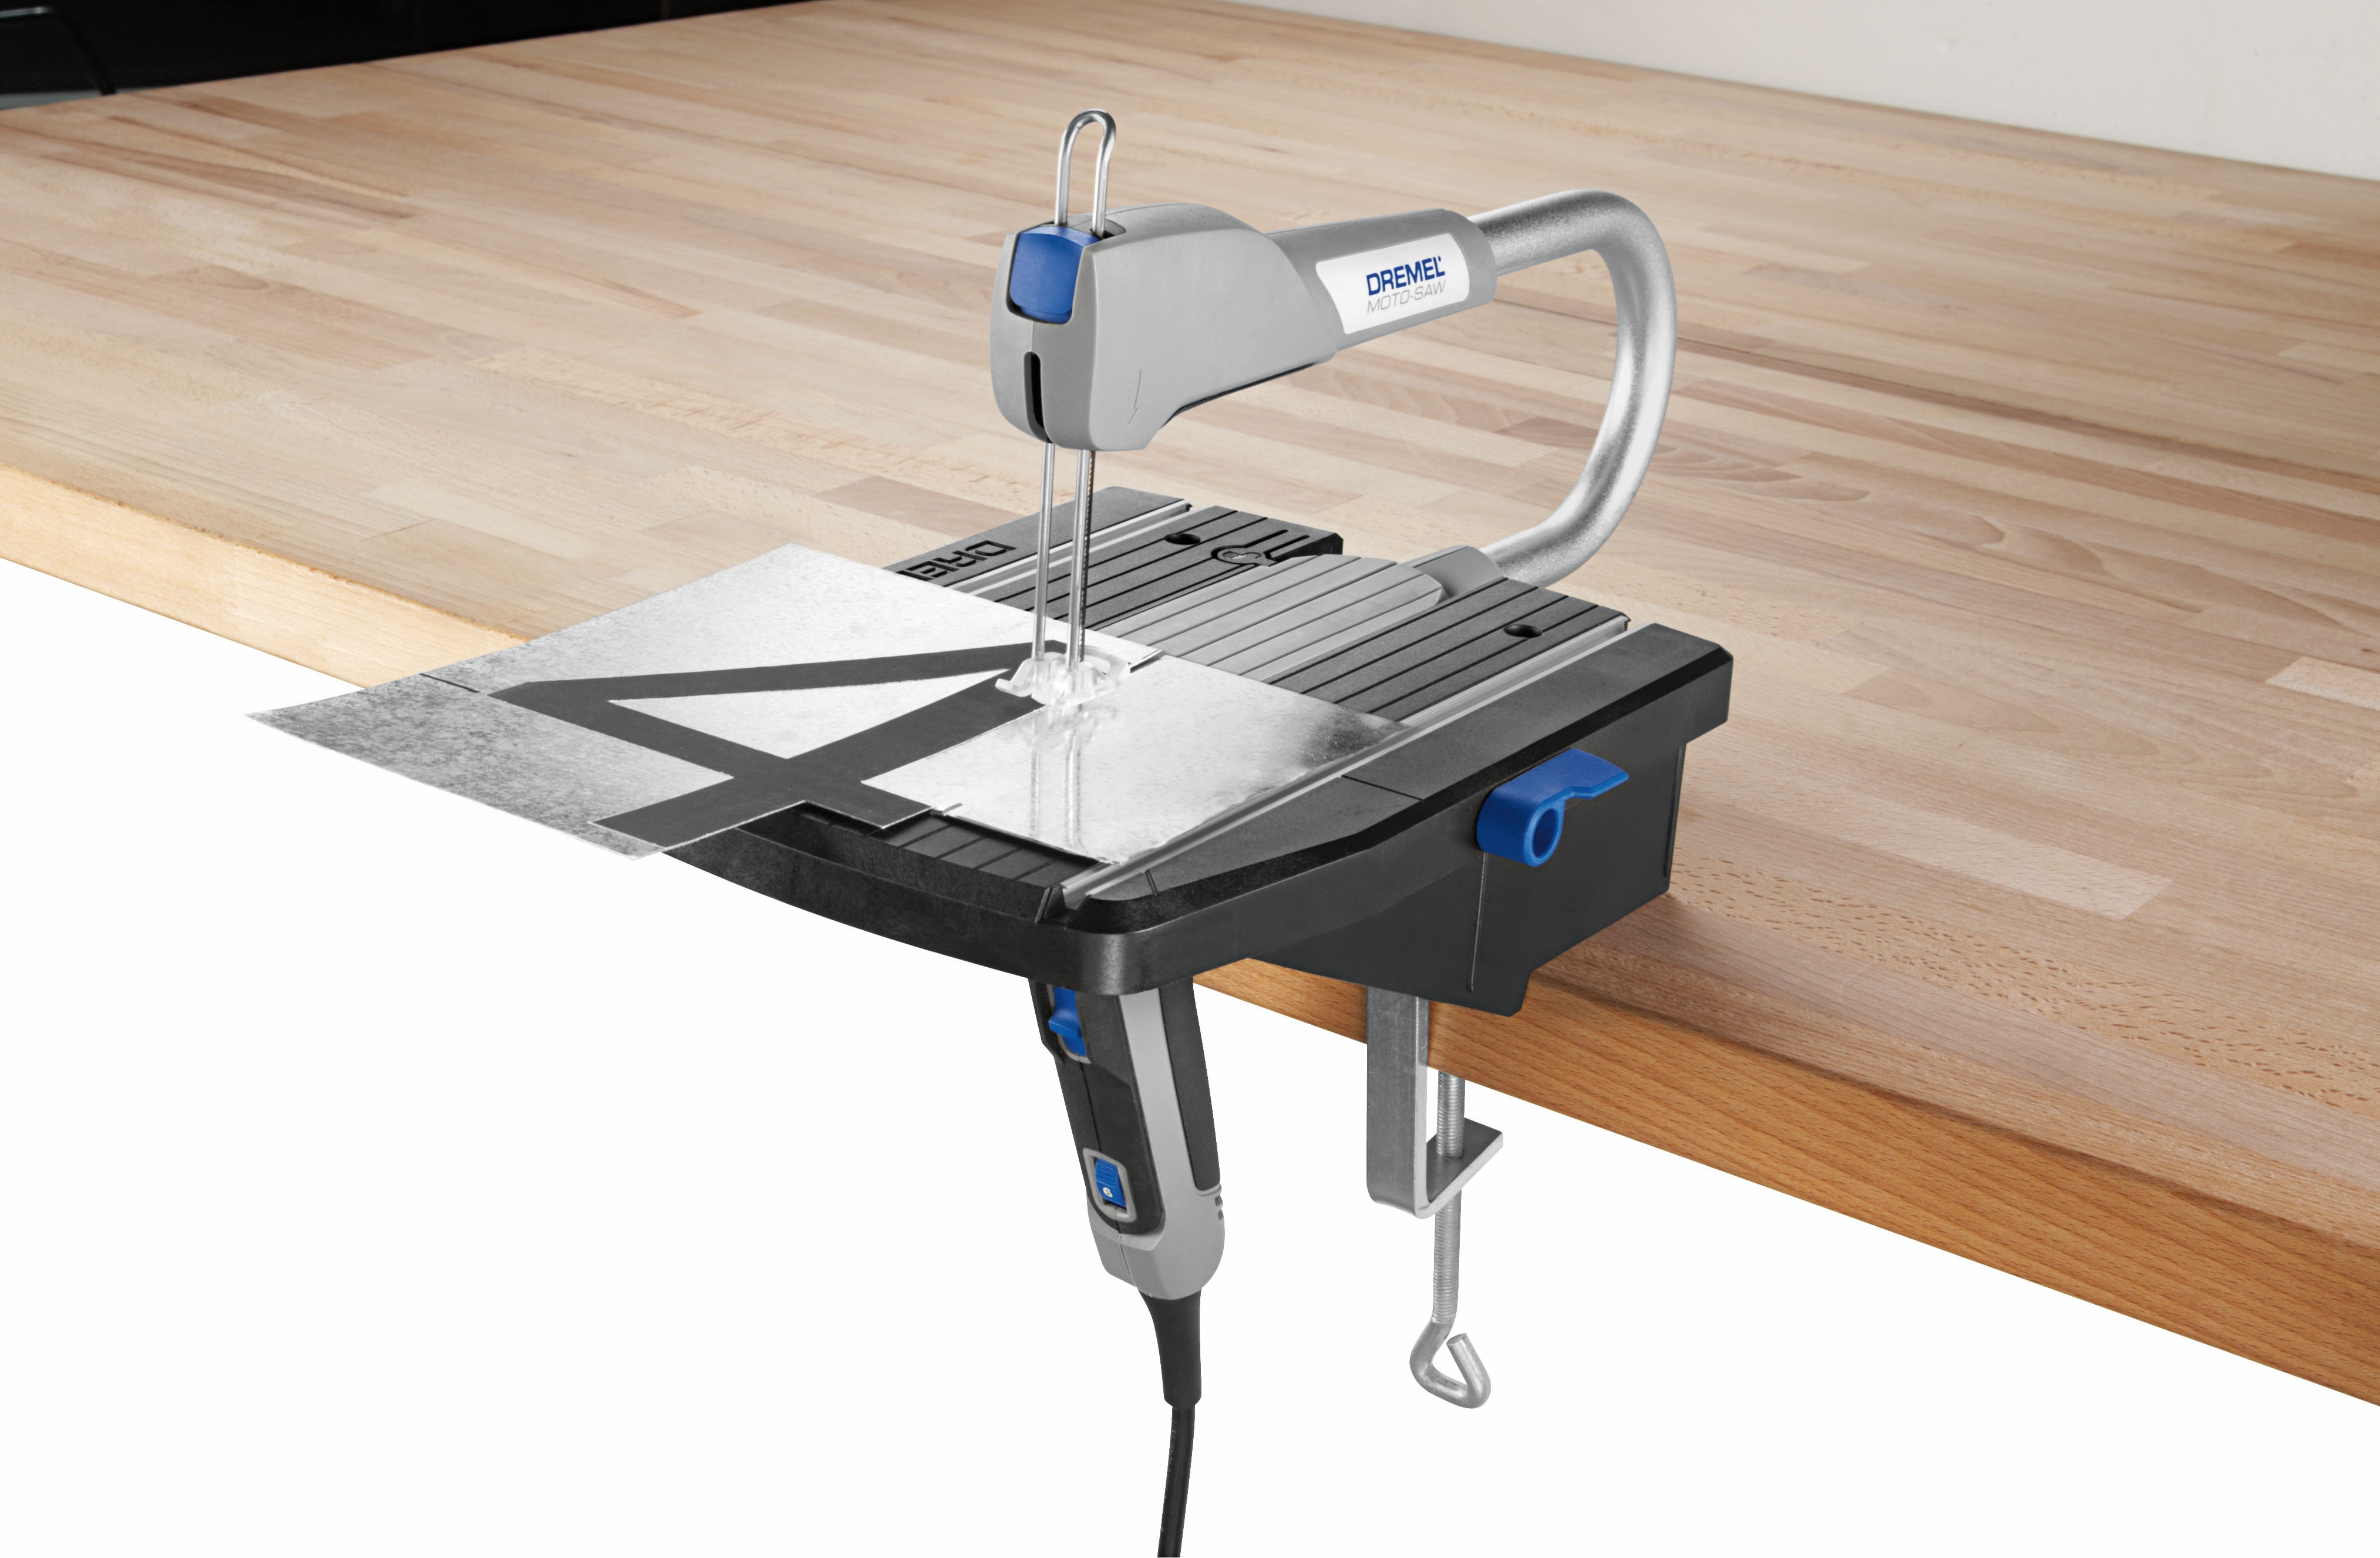 Dremel MS20-01 Moto-Saw 0.6 Amp Corded Scroll Saw for Plastic, Laminates,  and Metal